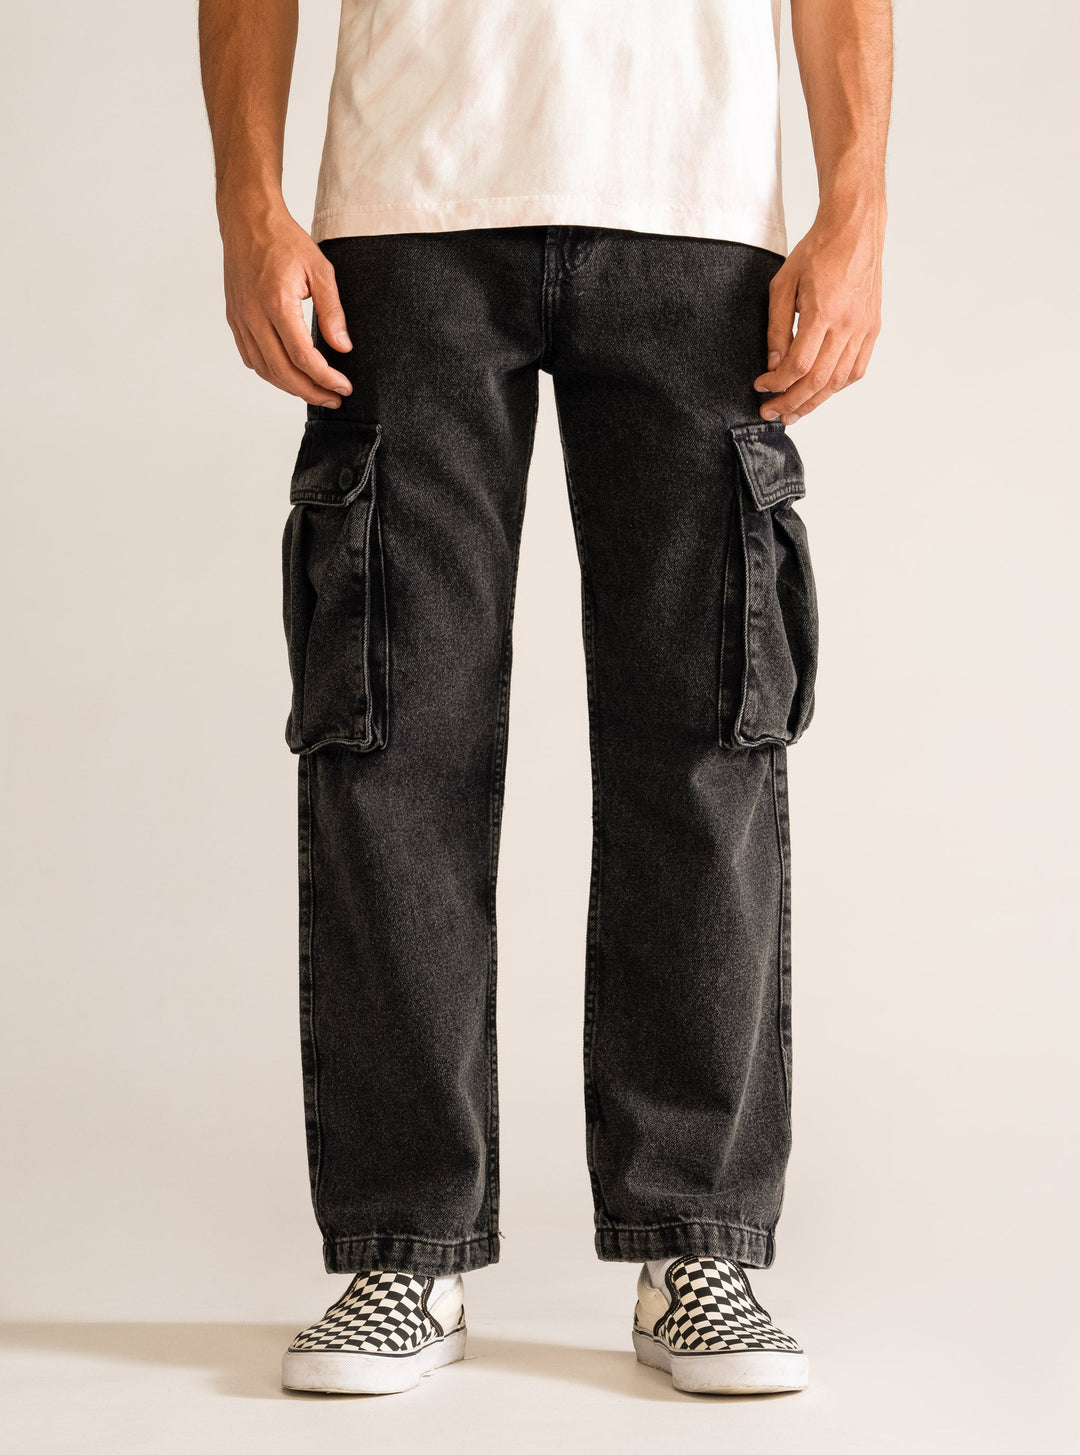 Taking Over Me Cargo Jeans, Black